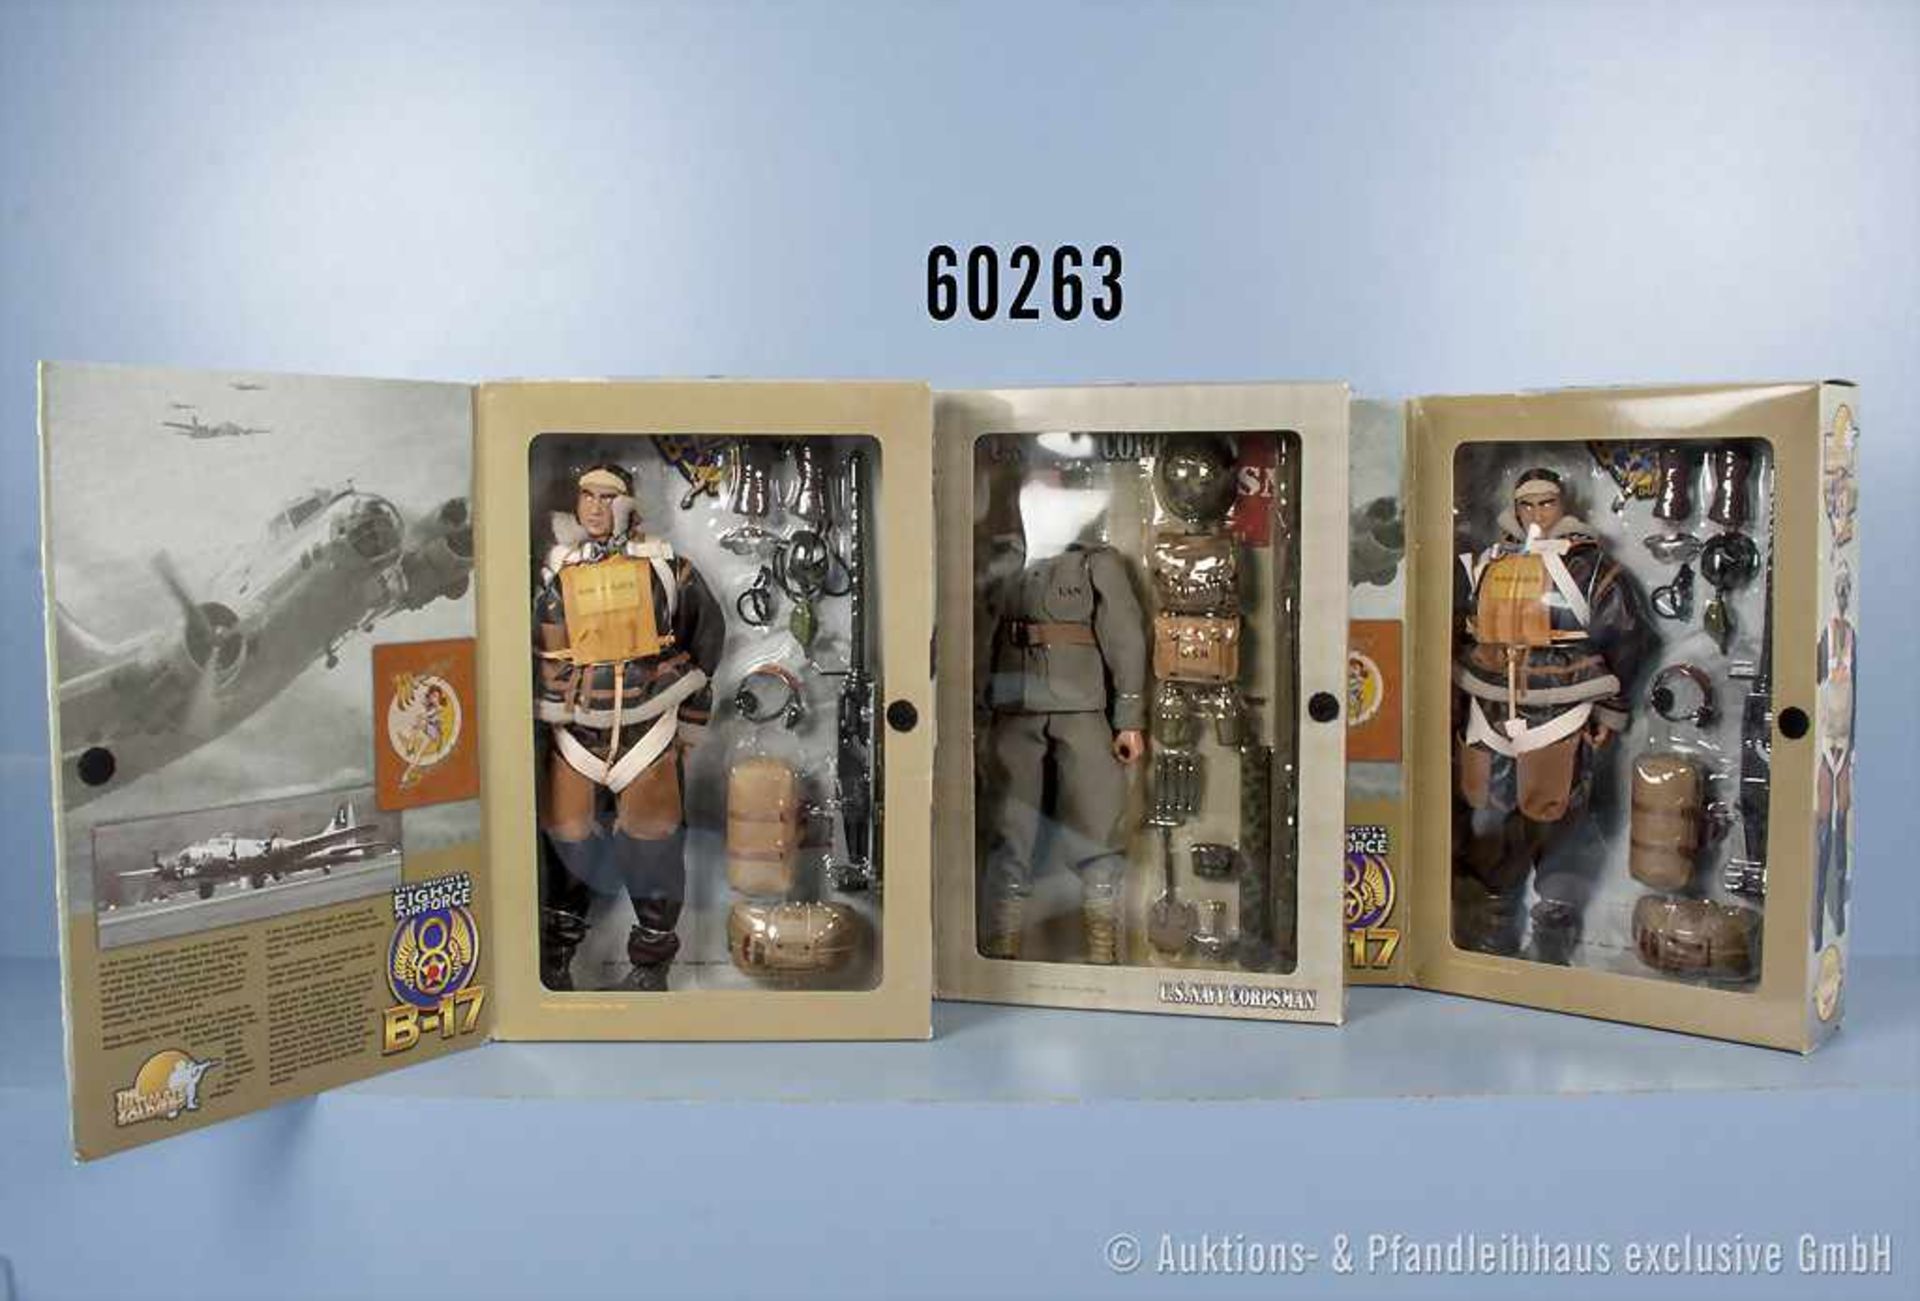 Konv. 3 The Ultimate Soldier WWII Action Figuren, 2 x The Mighty Eigth Air Force B-17 Waistgunner